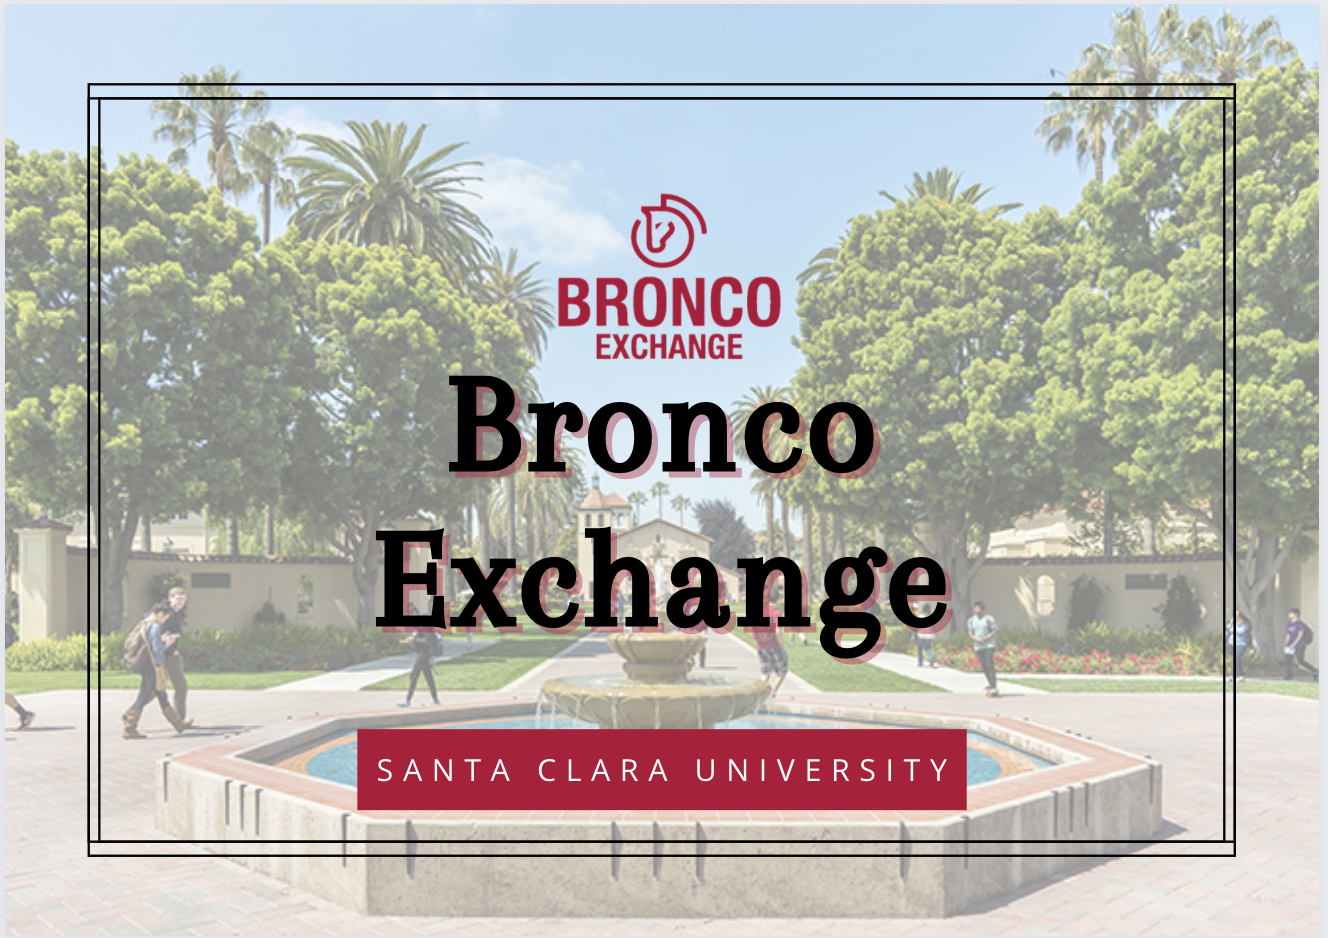 Bronco Exchange image link to story